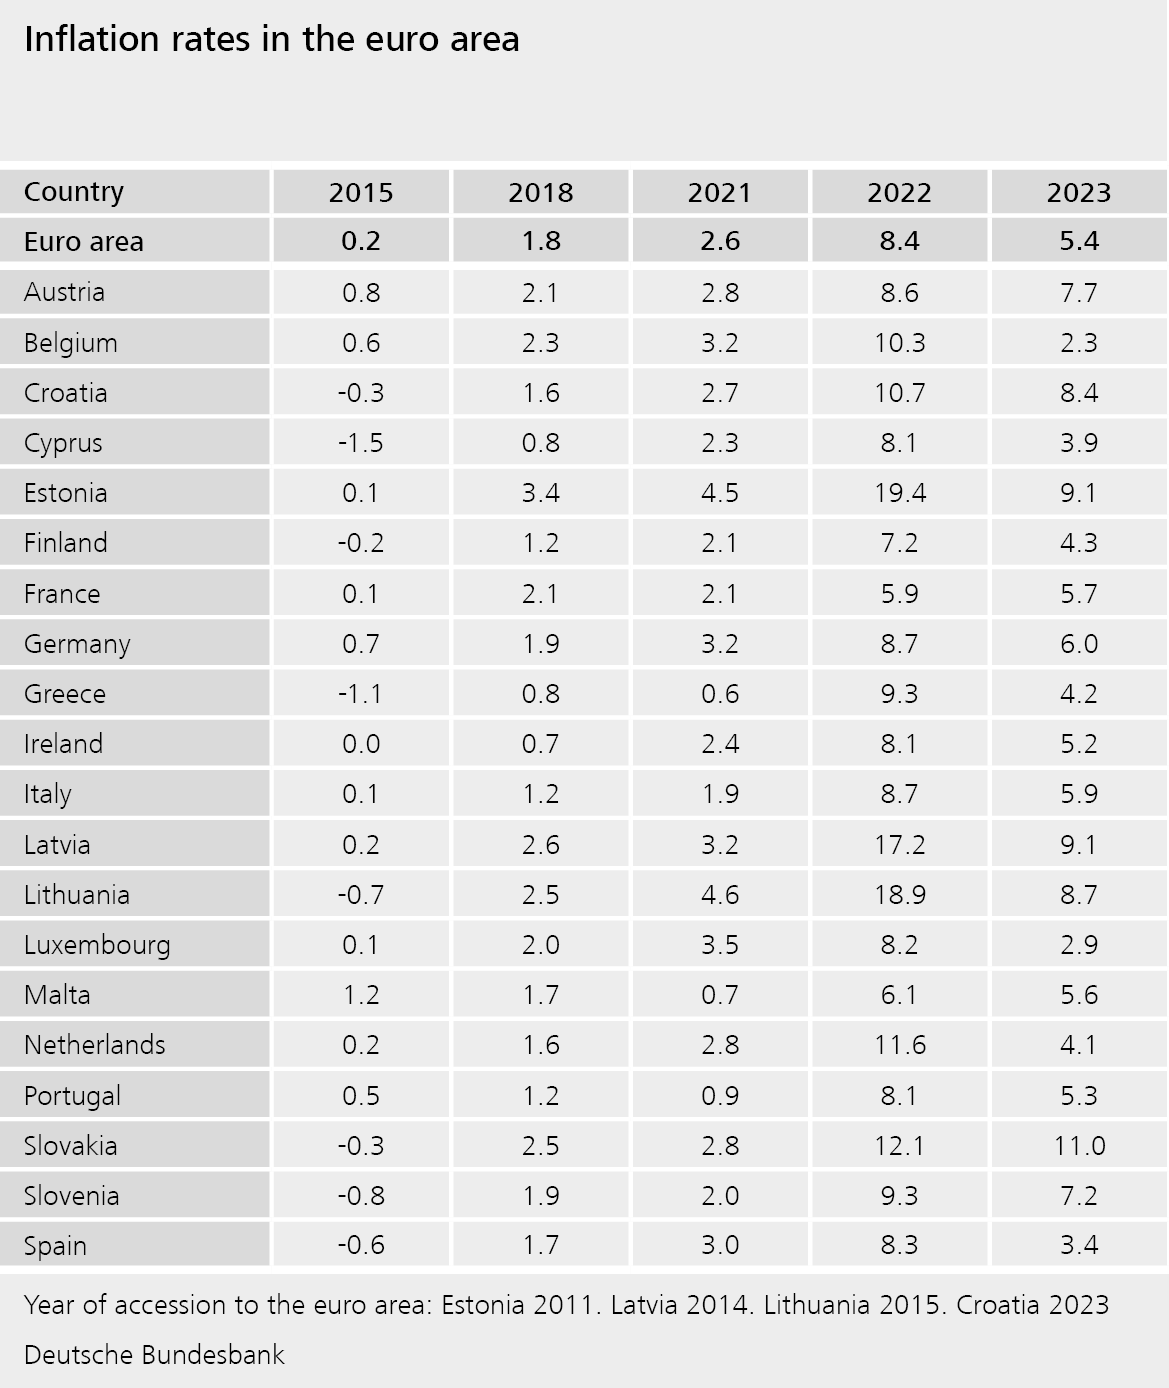 Table: Inflation rates in the euro area